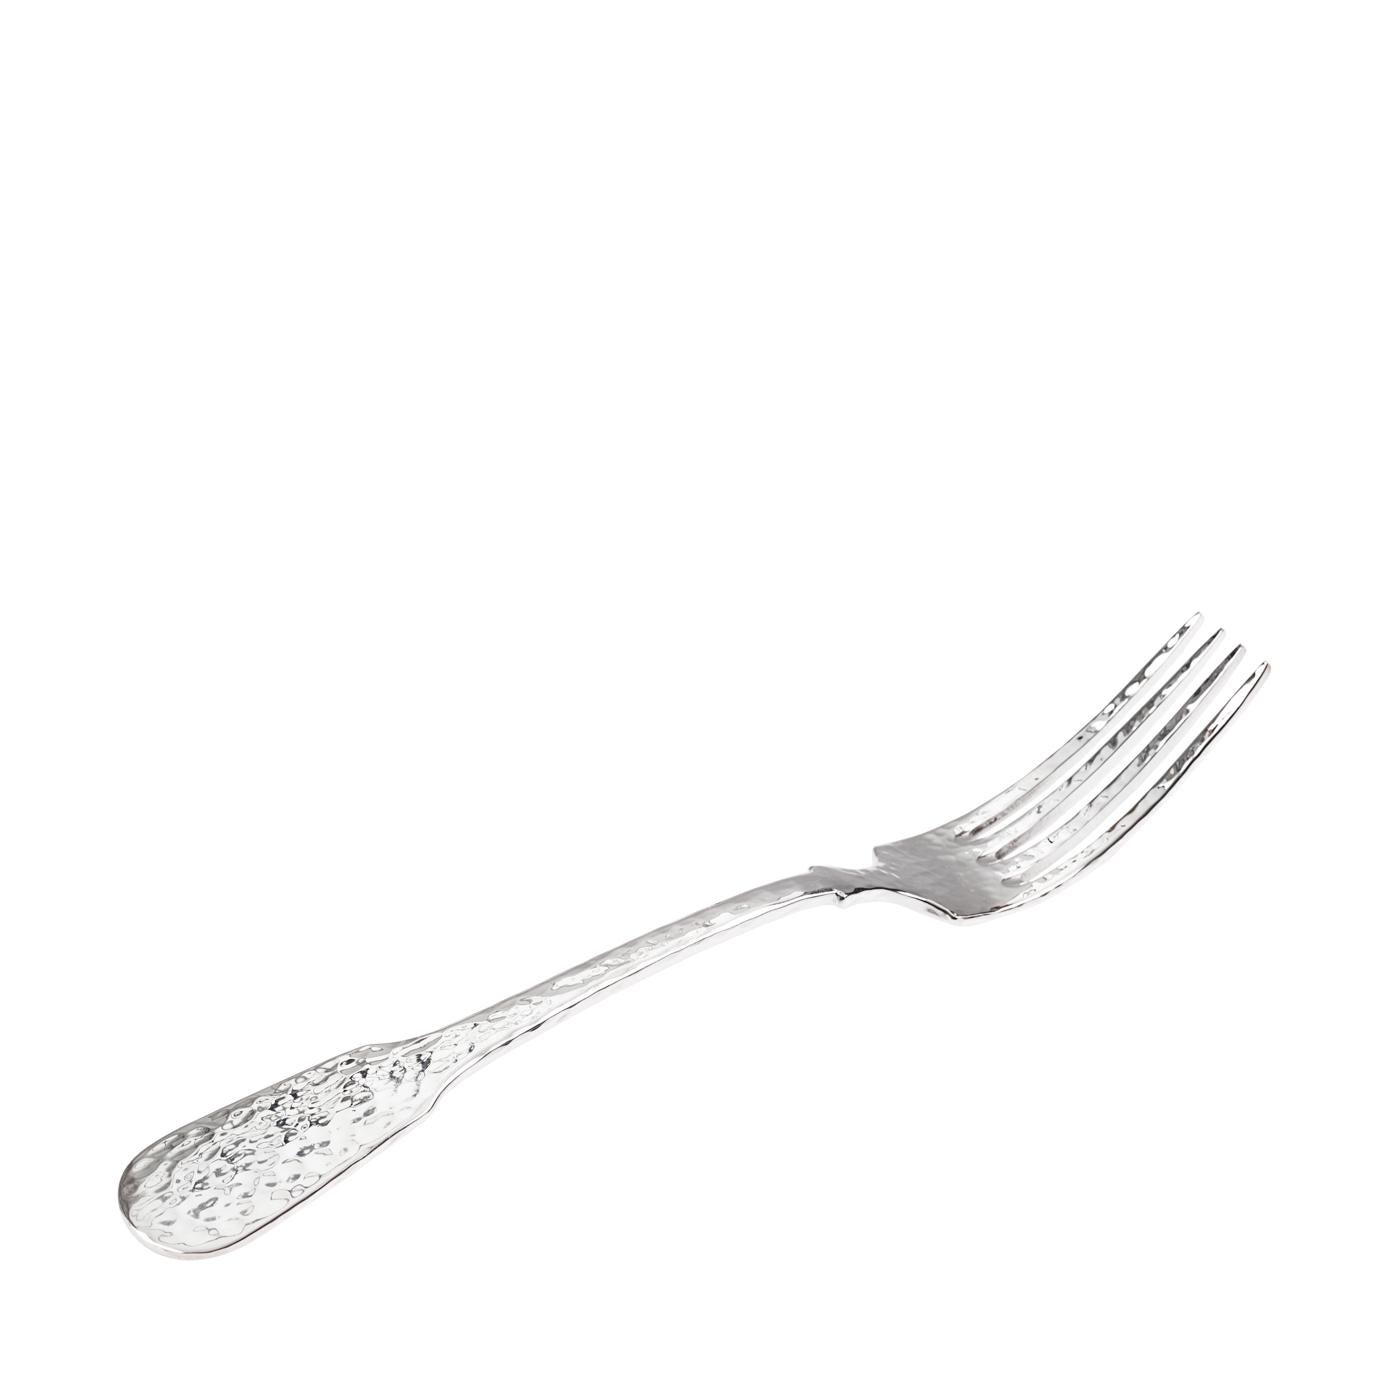 A hand-hammered finish reminiscent of Trojan metalwork renders this set of sterling silver cutlery both archaic and modern at once. Expertly handcrafted by the artisans of the Florentine silversmith atelier Pampaloni, this set of silver forks and